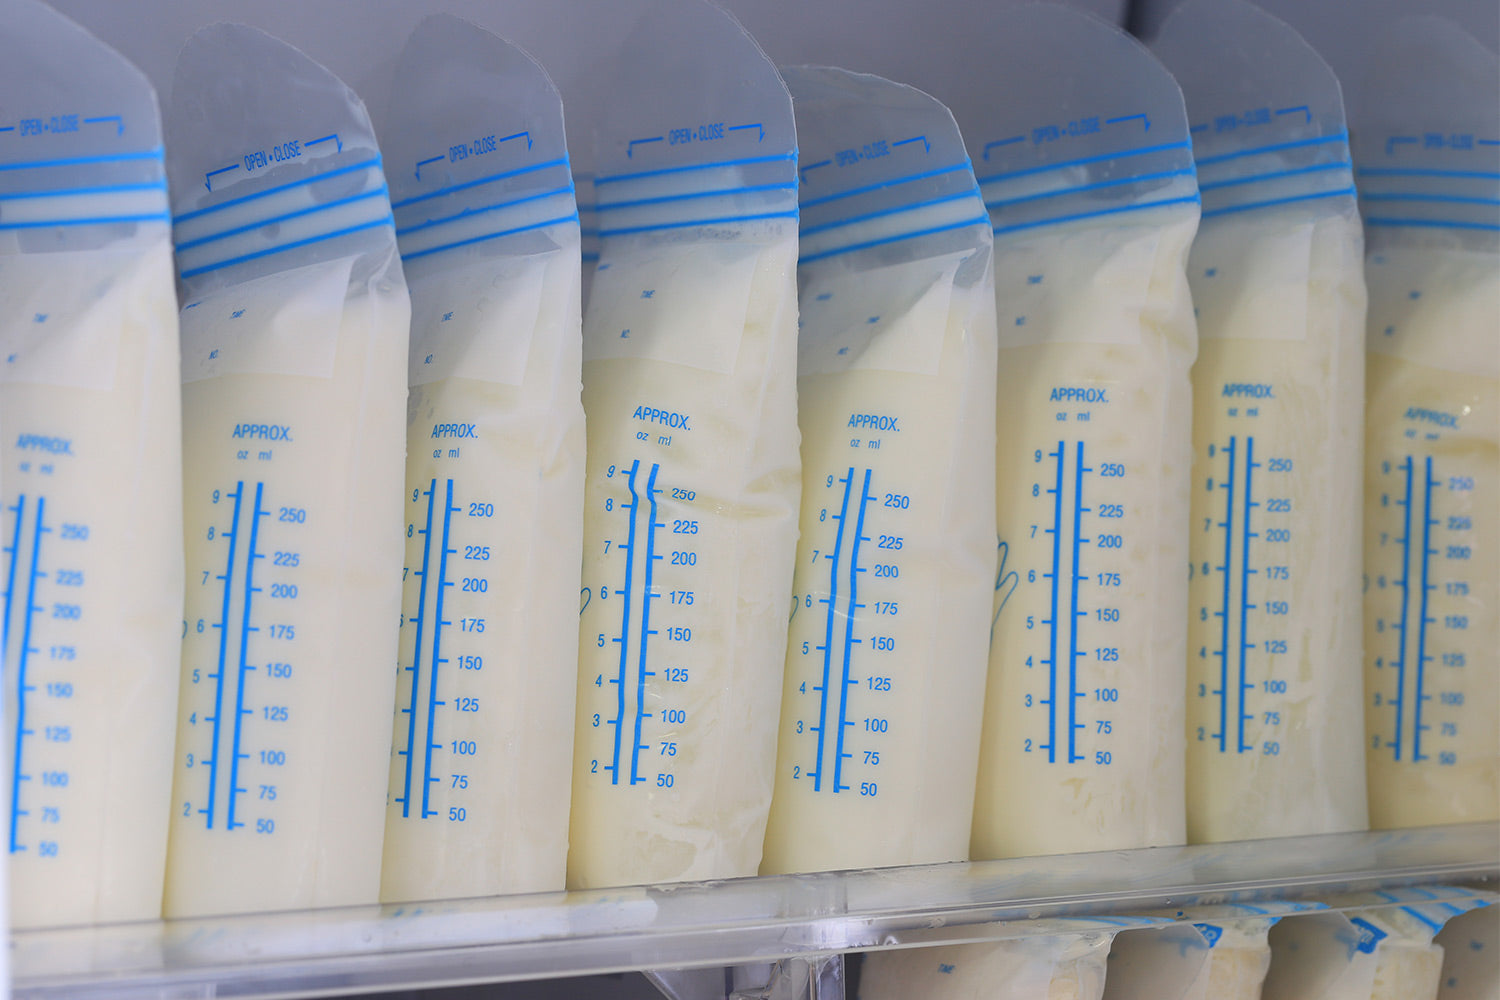 10 reasons for low milk supply, plus tips to increase breast milk - Today's  Parent